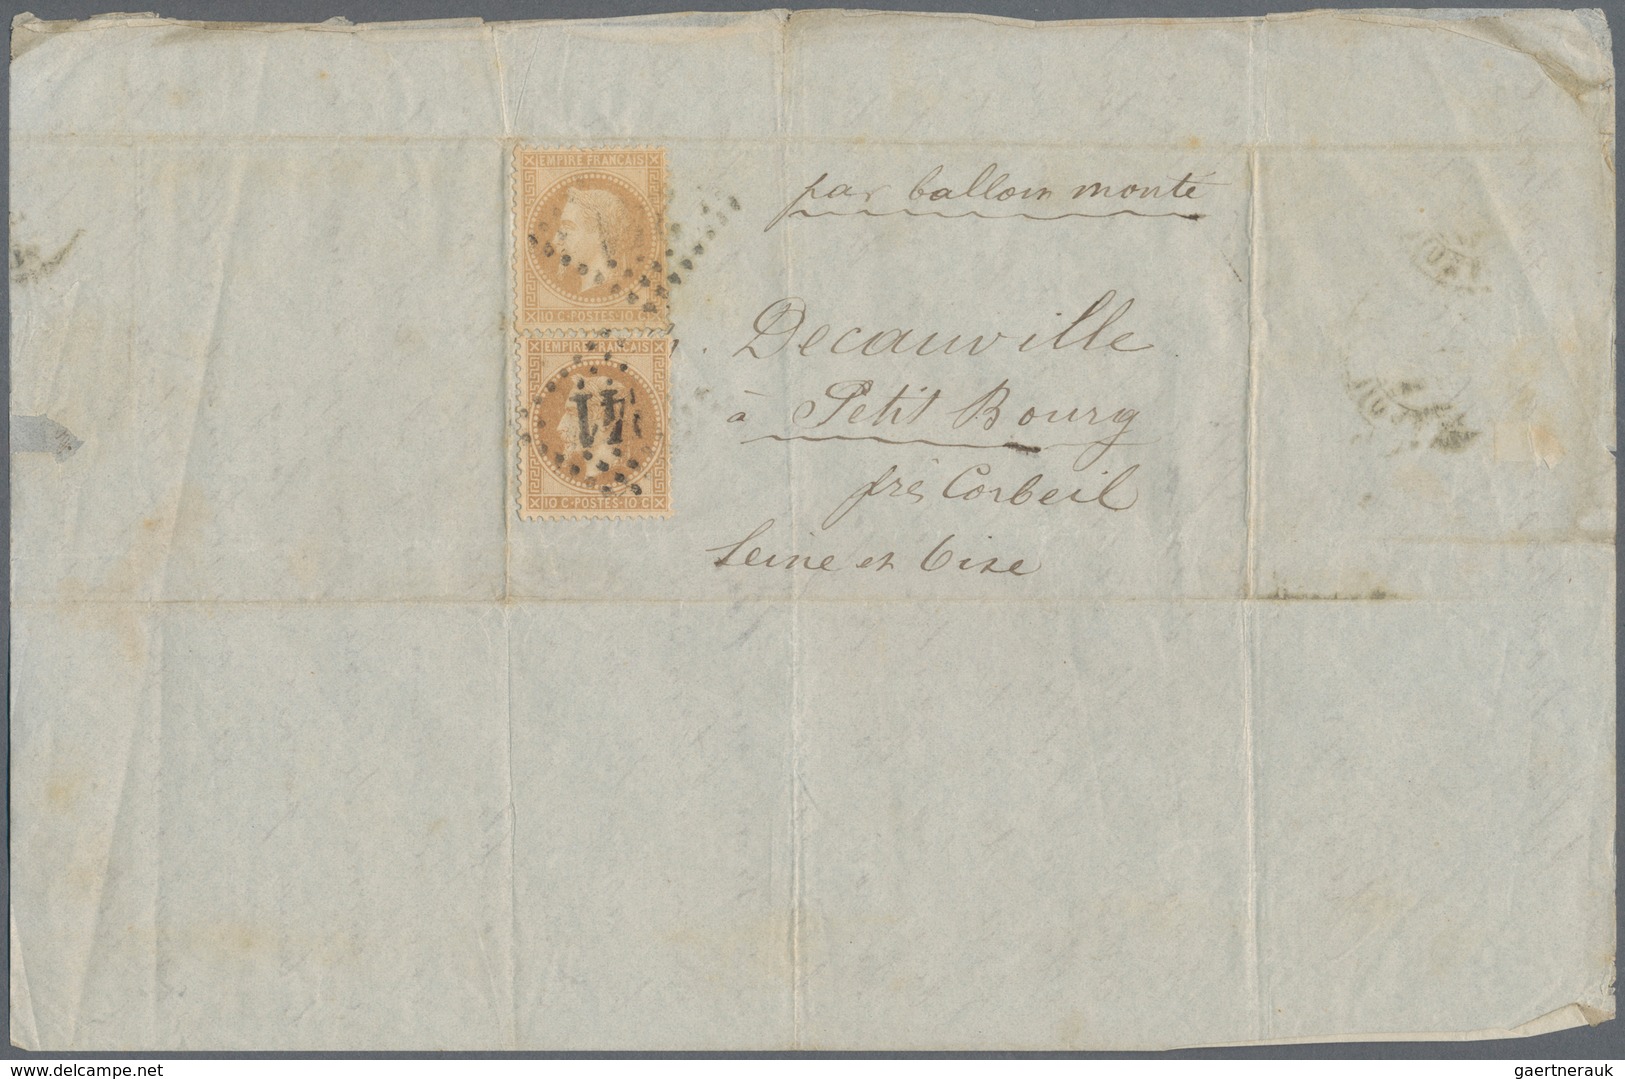 Frankreich - Ballonpost: 1870-71 BALLON MONTÉ: Correspondence of 24 letters and postcards all from P